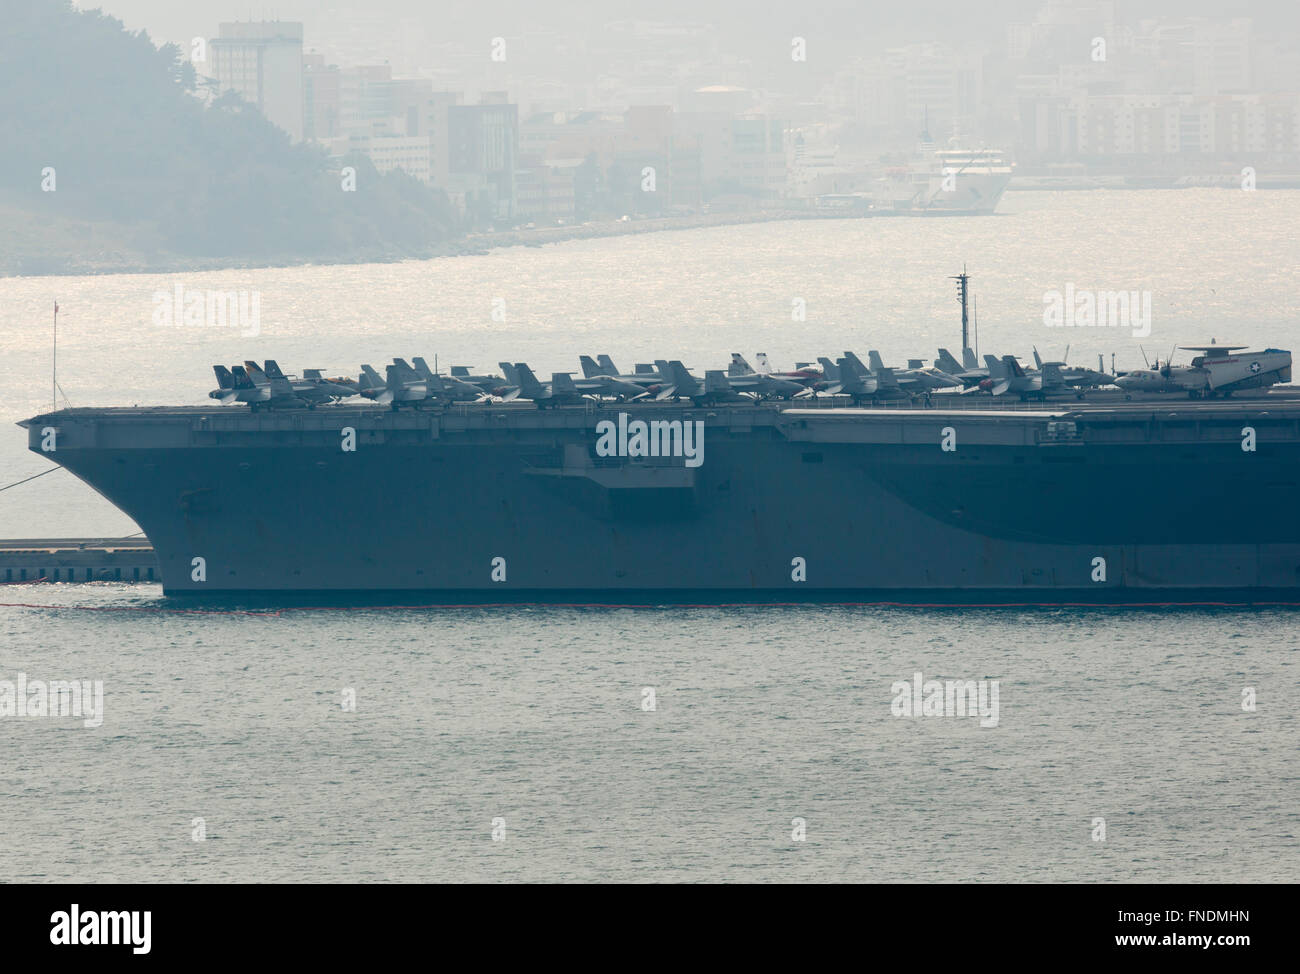 The USS John C. Stennis, Mar 14, 2016 : U.S. nuclear-powered supercarrier, the USS John C. Stennis is seen at a South Korean navy port in Busan, about 450 km southeast of Seoul, South Korea. The USS John C. Stennis (CVN-74) arrived in South Korea on March 13, 2016 to participate in the Key Resolve military drills between South Korea and the United States, which is held from March 7-18. The USS John C. Stennis is the U.S. Navy's seventh Nimitz-class supercarrier, loaded with marine and navy aircraft including the F/A-18 Hornet, EA-6B Prowler combat jets and the E-2C Hawkeye early-warning aircra Stock Photo